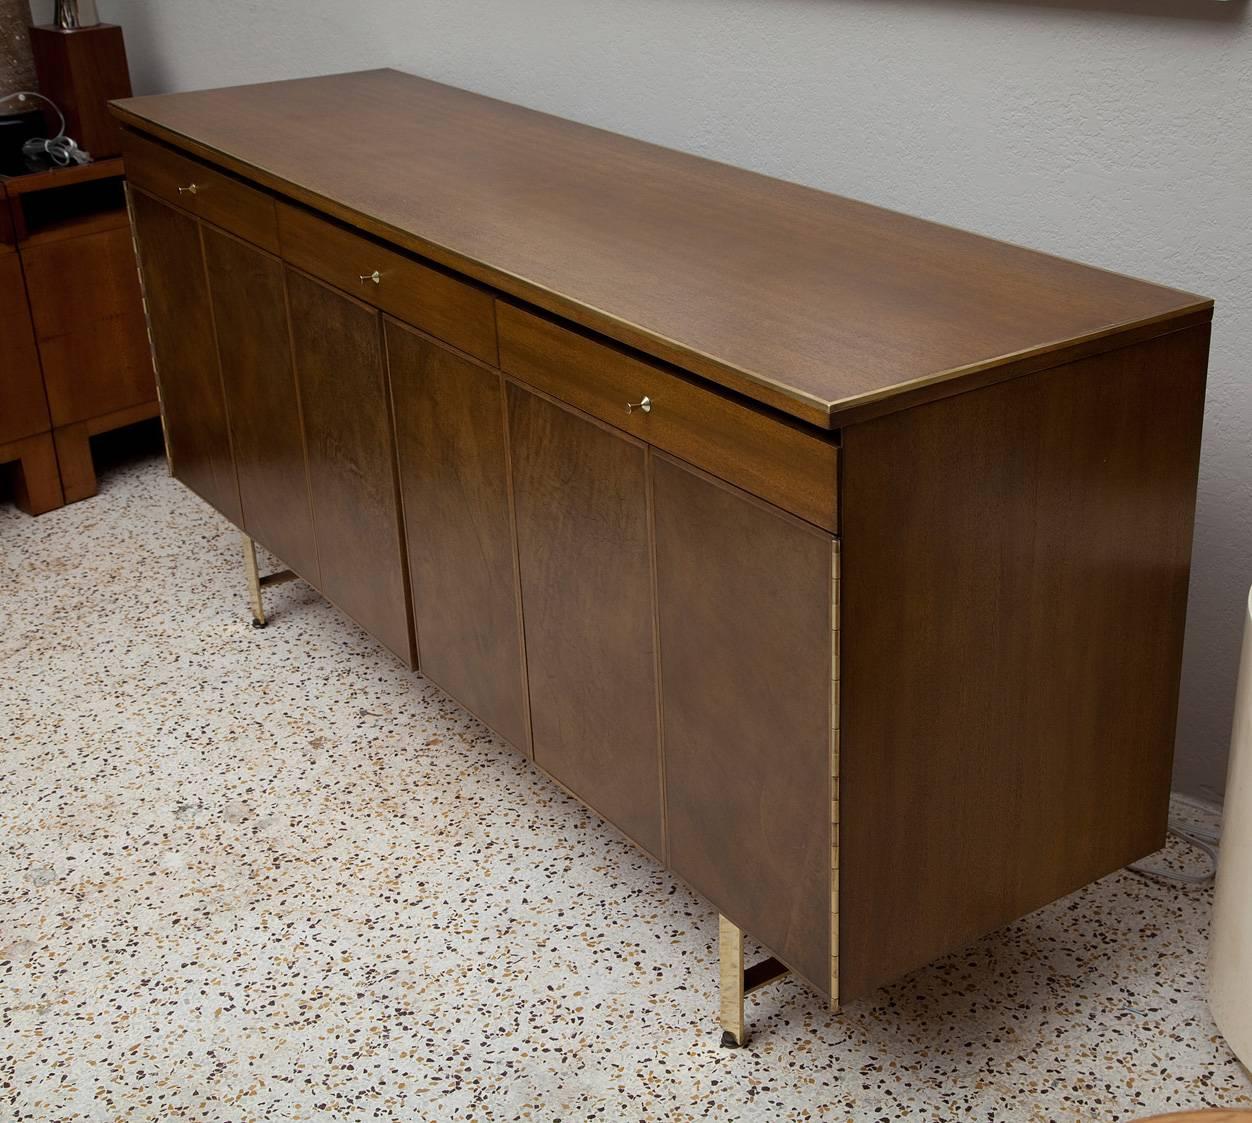 Beautifully restored Irwin Collection brass trimmed mahogany credenza with leather door fronts and heavy flat bar brass legs by Paul McCobb for Calvin. Olive-tinged leather lined drawers and door fronts in excellent condition.